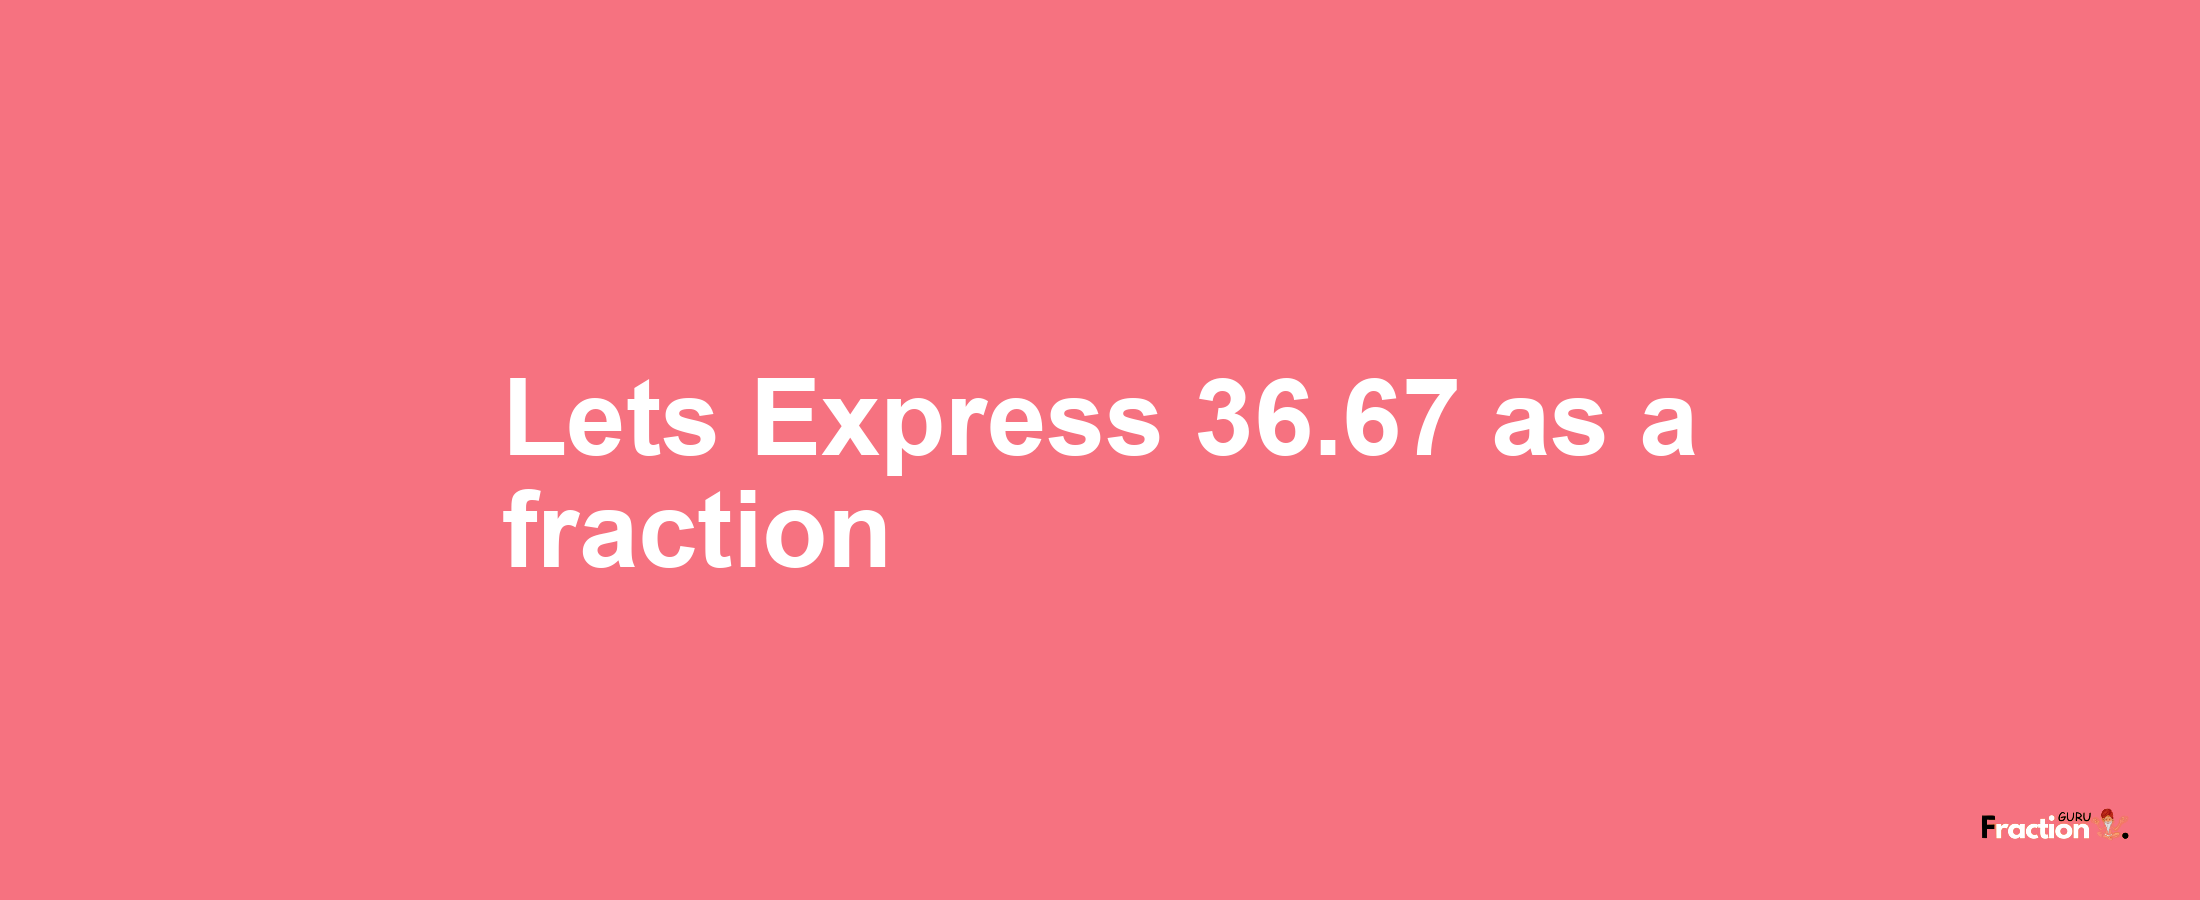 Lets Express 36.67 as afraction